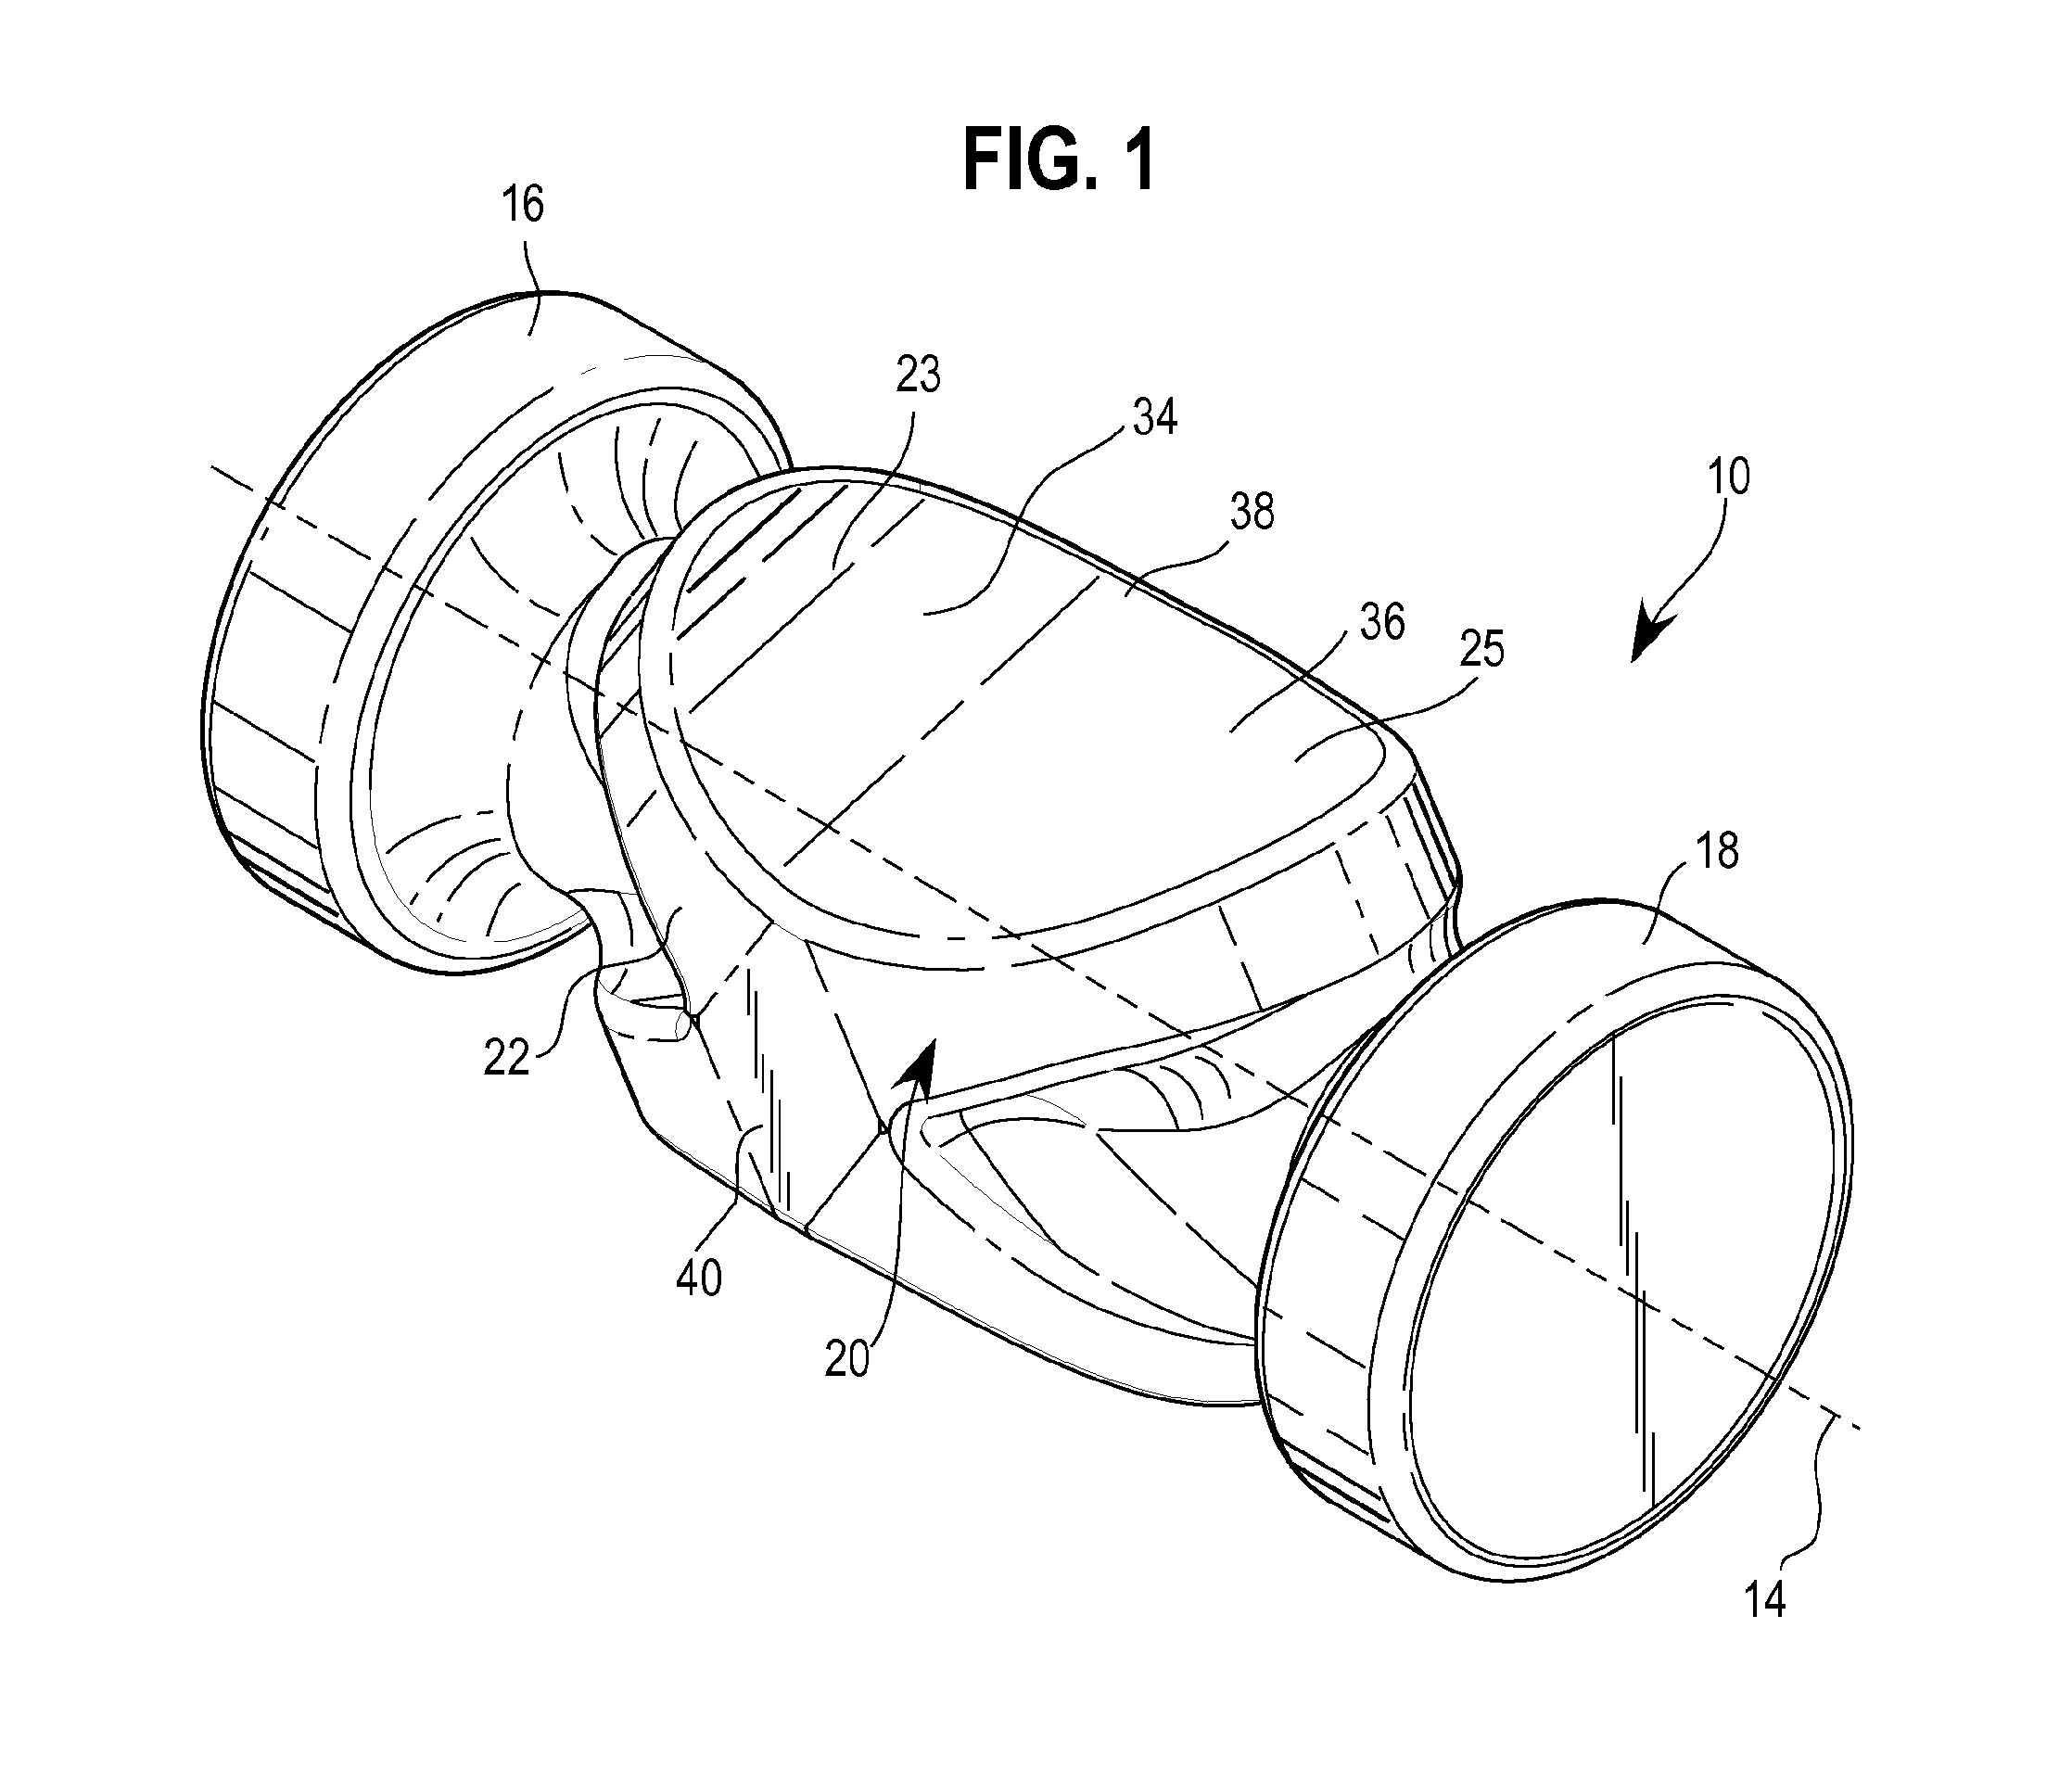 Muscle and tissue therapy device